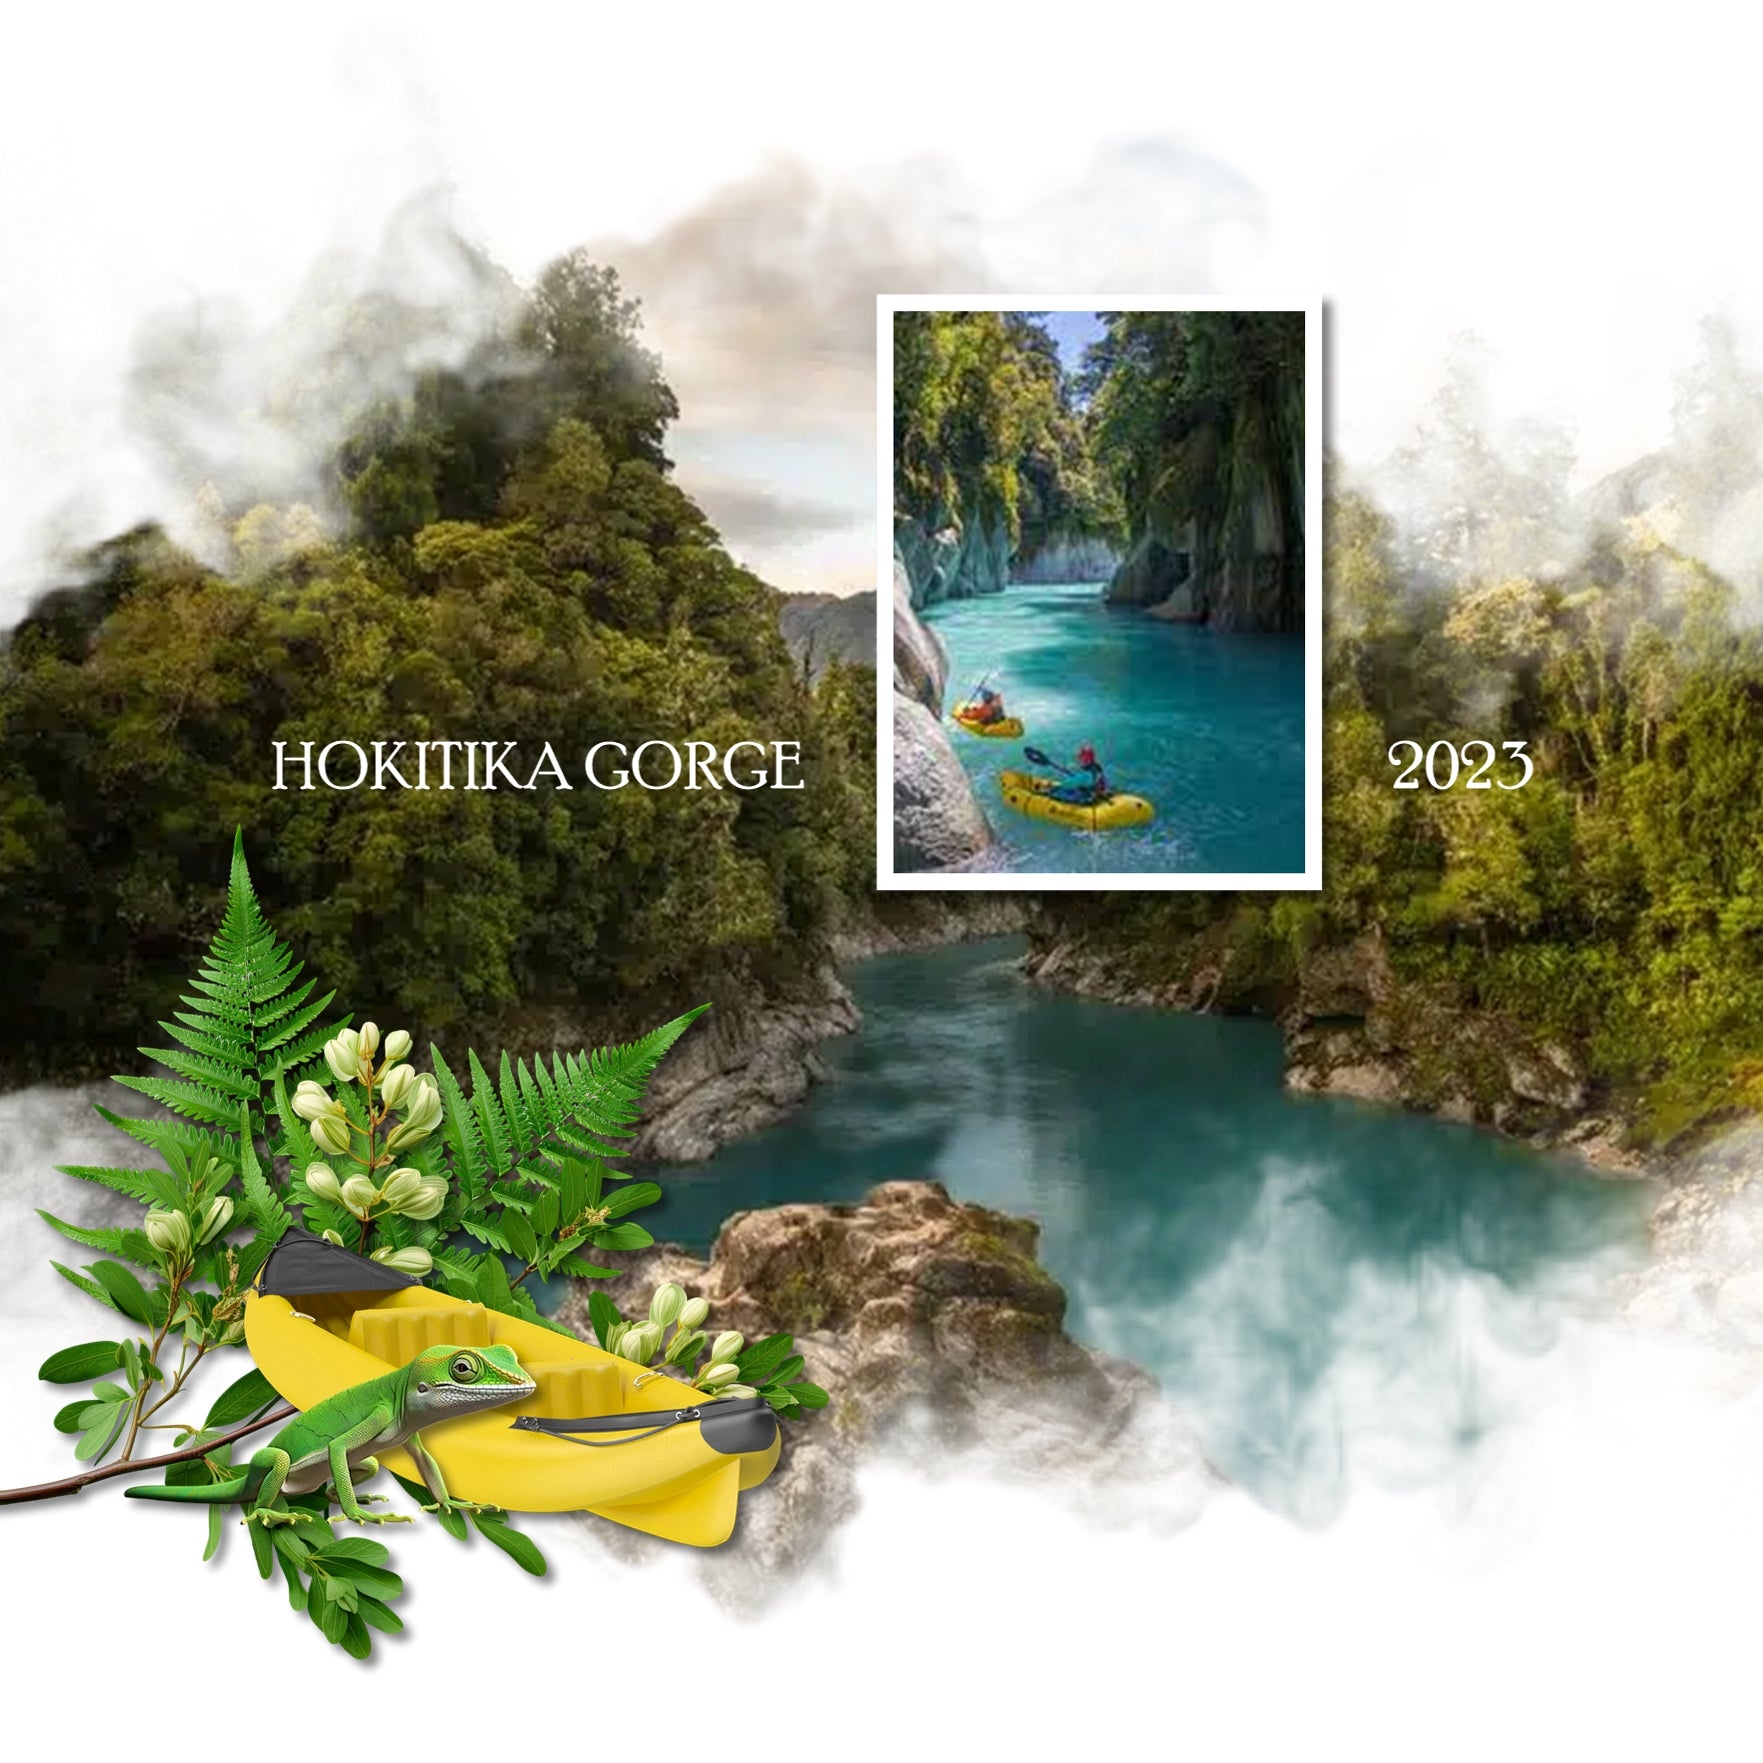 Highlight your vacation memories with these realistic digital art embellishments. Great for digital scrapbooking holidays to New Zealand and Australia and exploring native and indigenous life throughout Polynesia! Embellishments include tram, incline train, coat of arms, coin, money, ethnic flag, Maori flag, flags, territory, helicopter, kiwi fruit, pavlova dessert, Hobbit door, mushroom, glacier, and more.